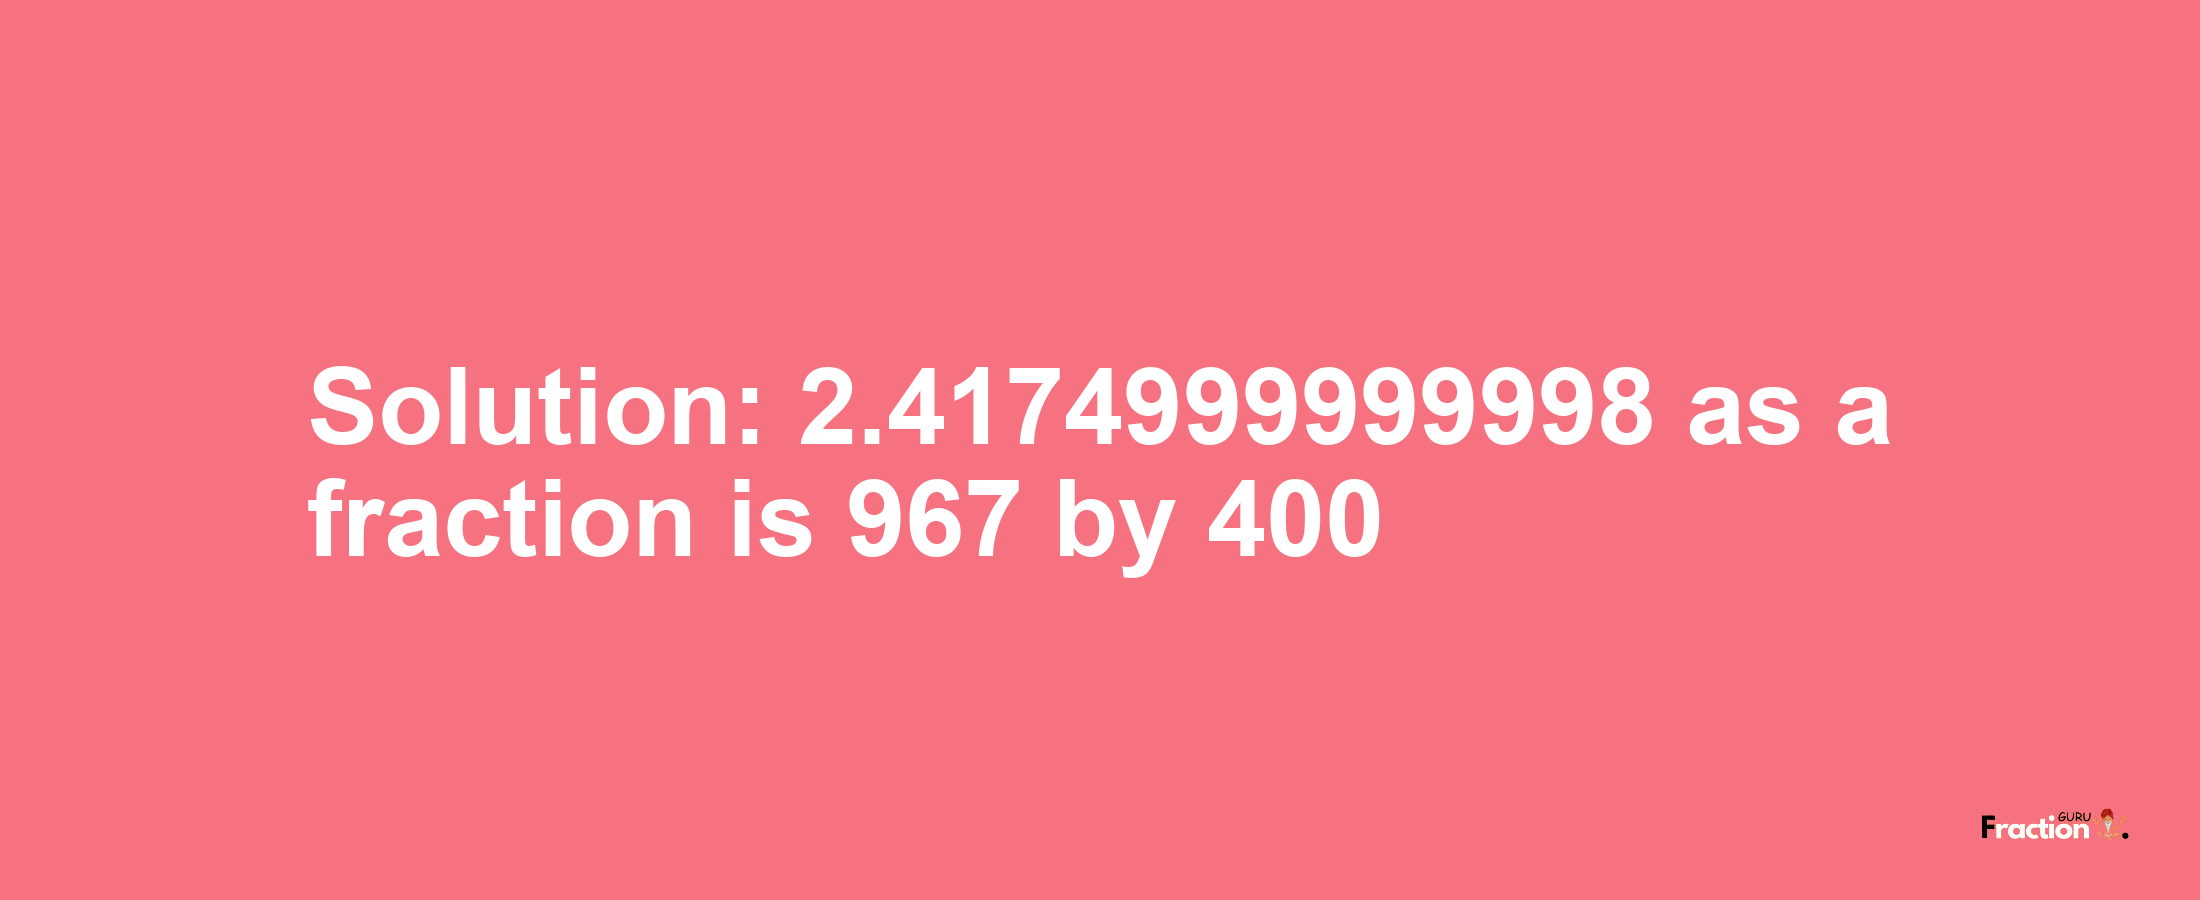 Solution:2.4174999999998 as a fraction is 967/400